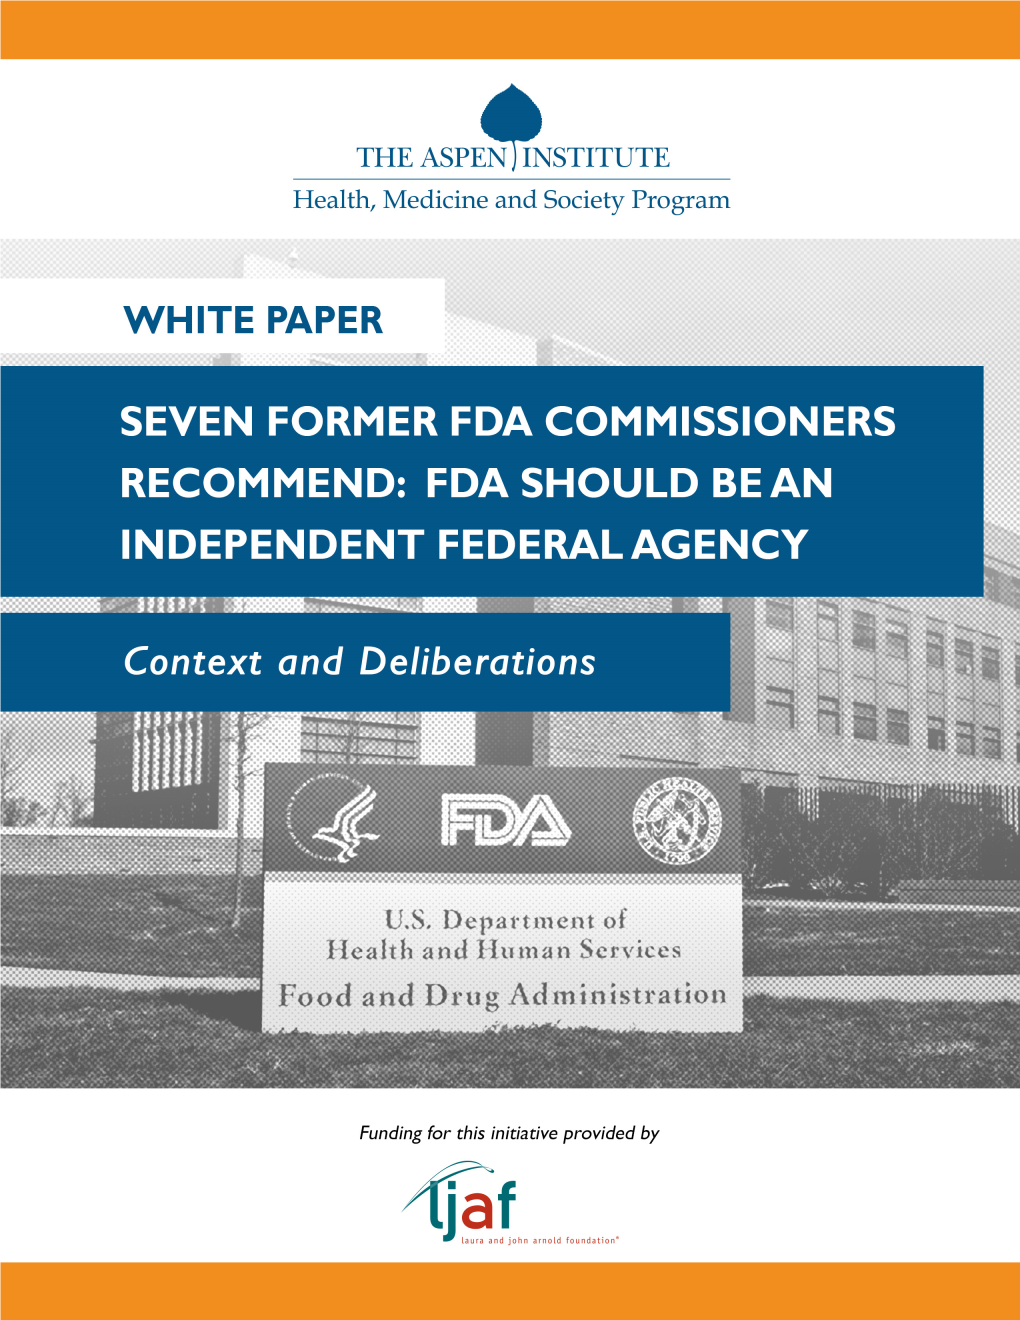 FDA) Commissioners Who Called for Restructuring the FDA As an Independent Federal Agency